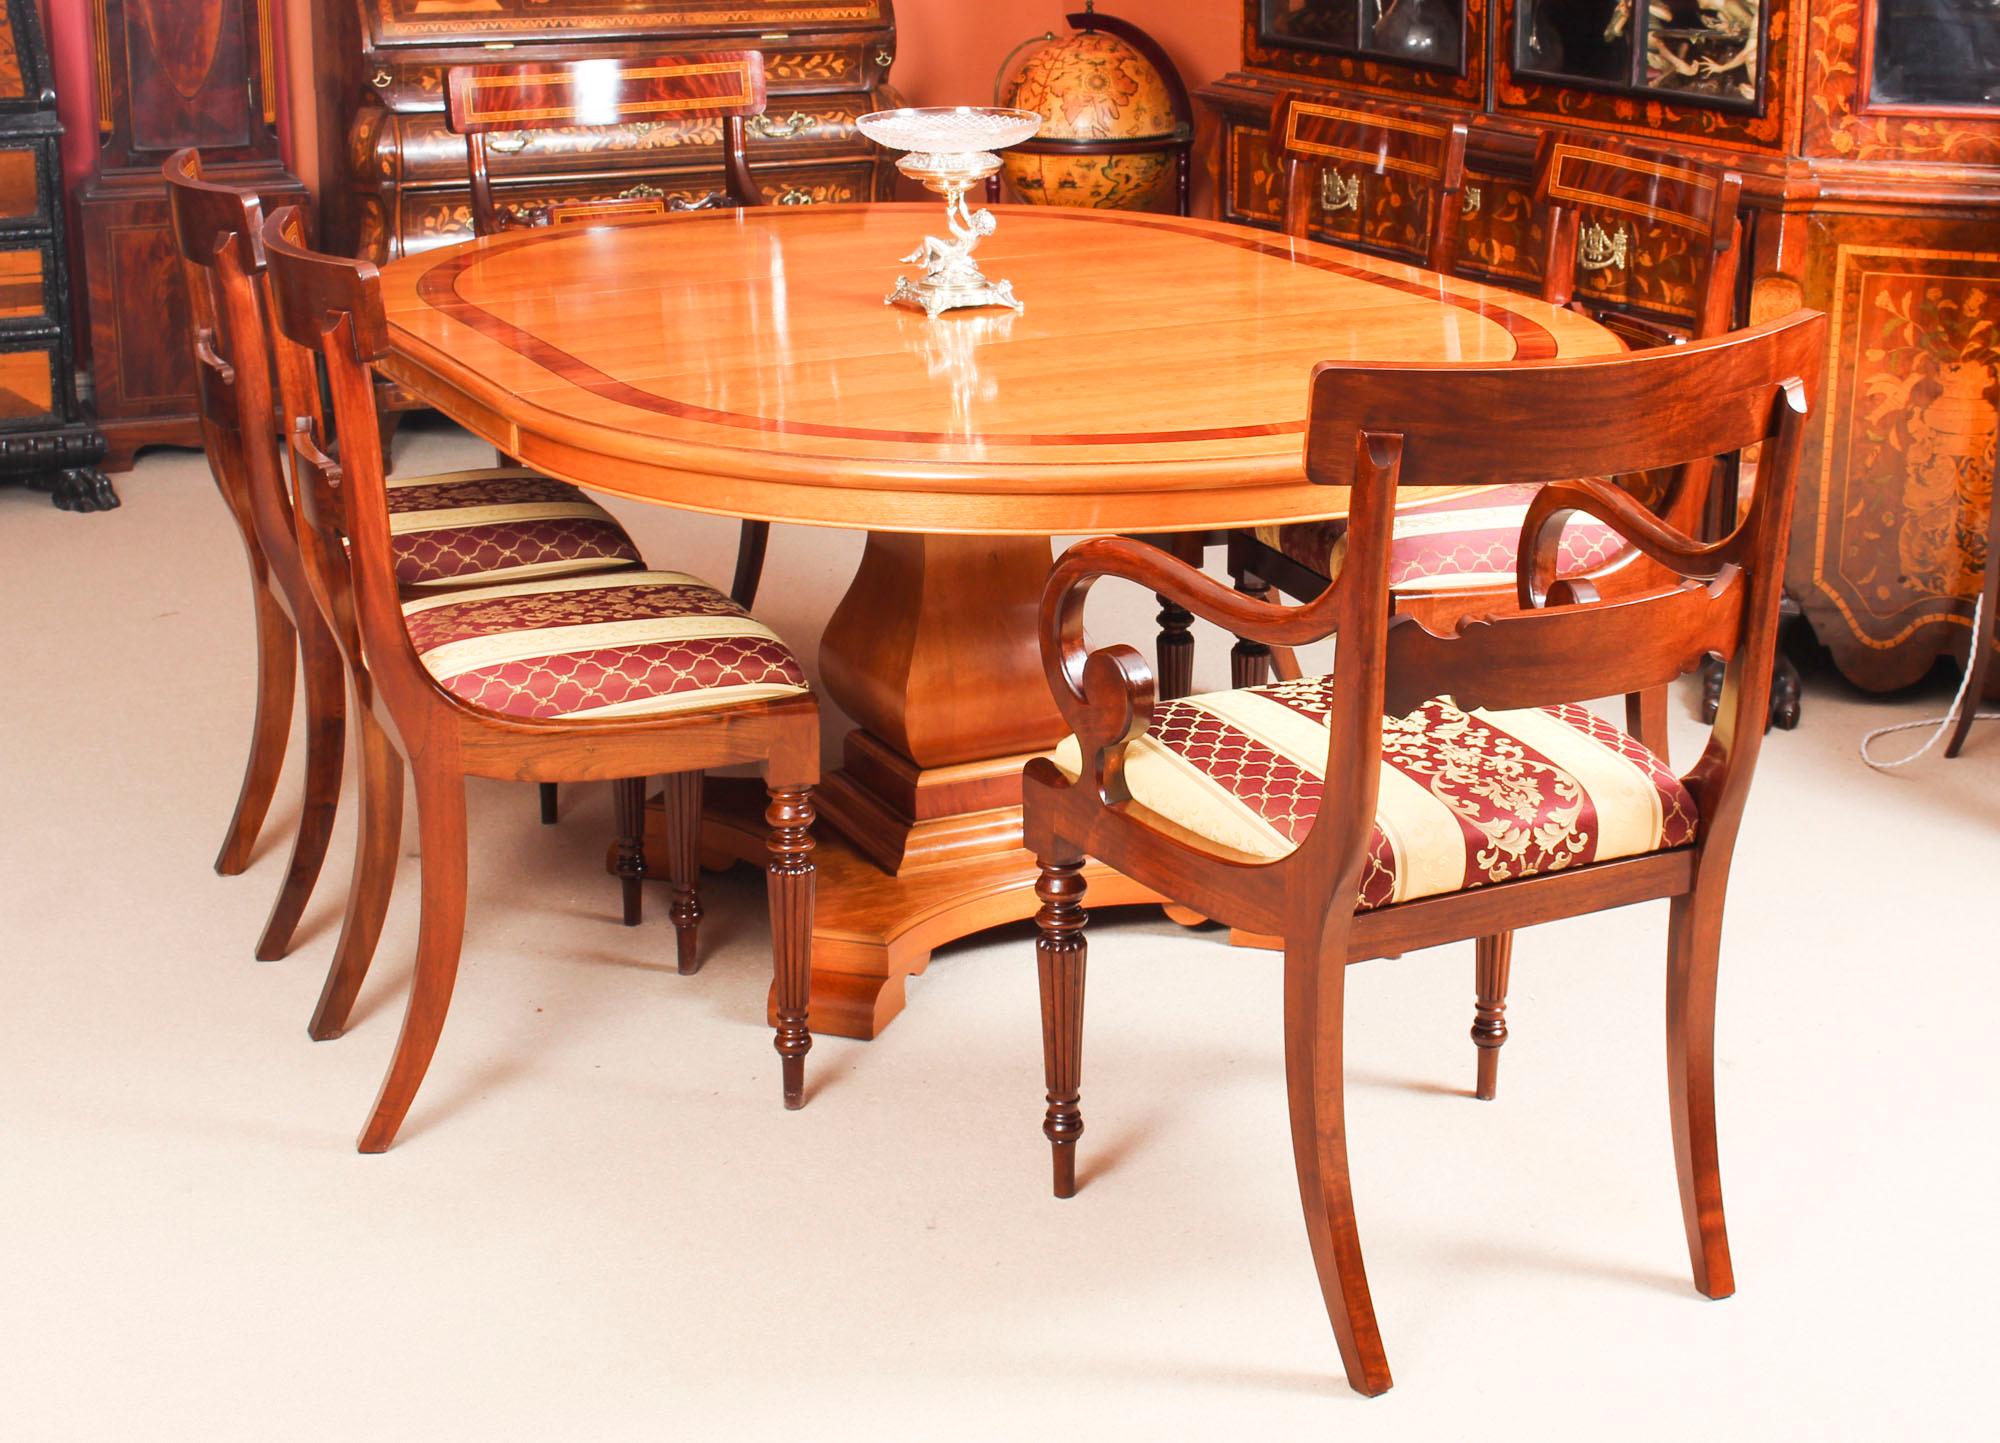 This is a magnificent vintage dining set comprising a cherrywood dining table by the renowned Norwich cabinet maker Charles Barr and a set of eight dining chairs, dating from the late 20th century.

This beautiful table is circular in shape when